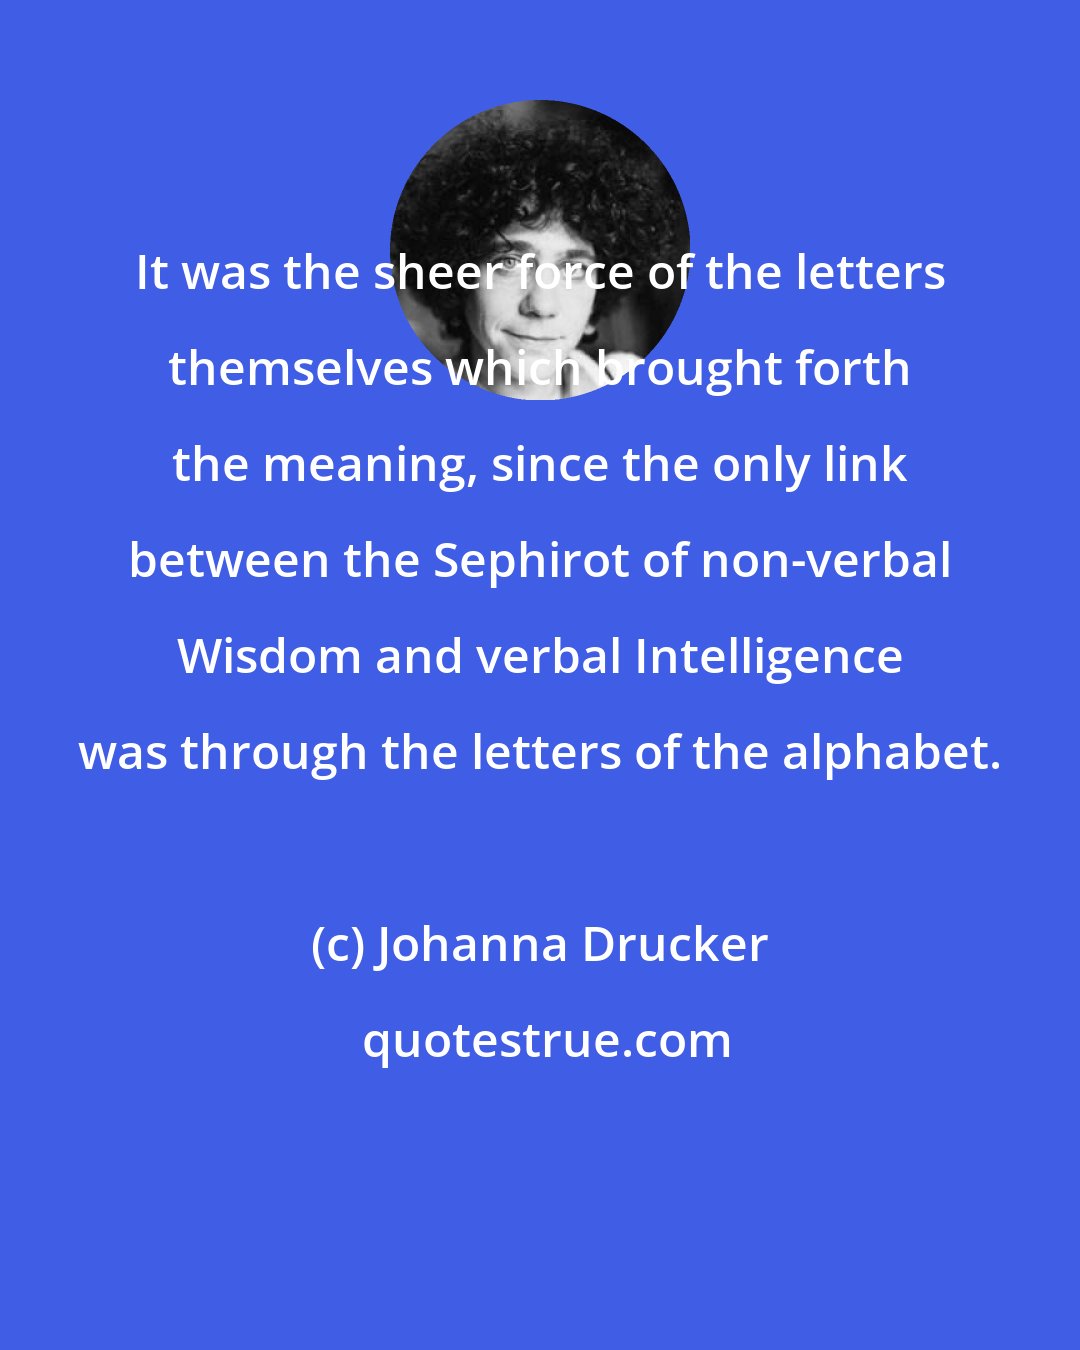 Johanna Drucker: It was the sheer force of the letters themselves which brought forth the meaning, since the only link between the Sephirot of non-verbal Wisdom and verbal Intelligence was through the letters of the alphabet.